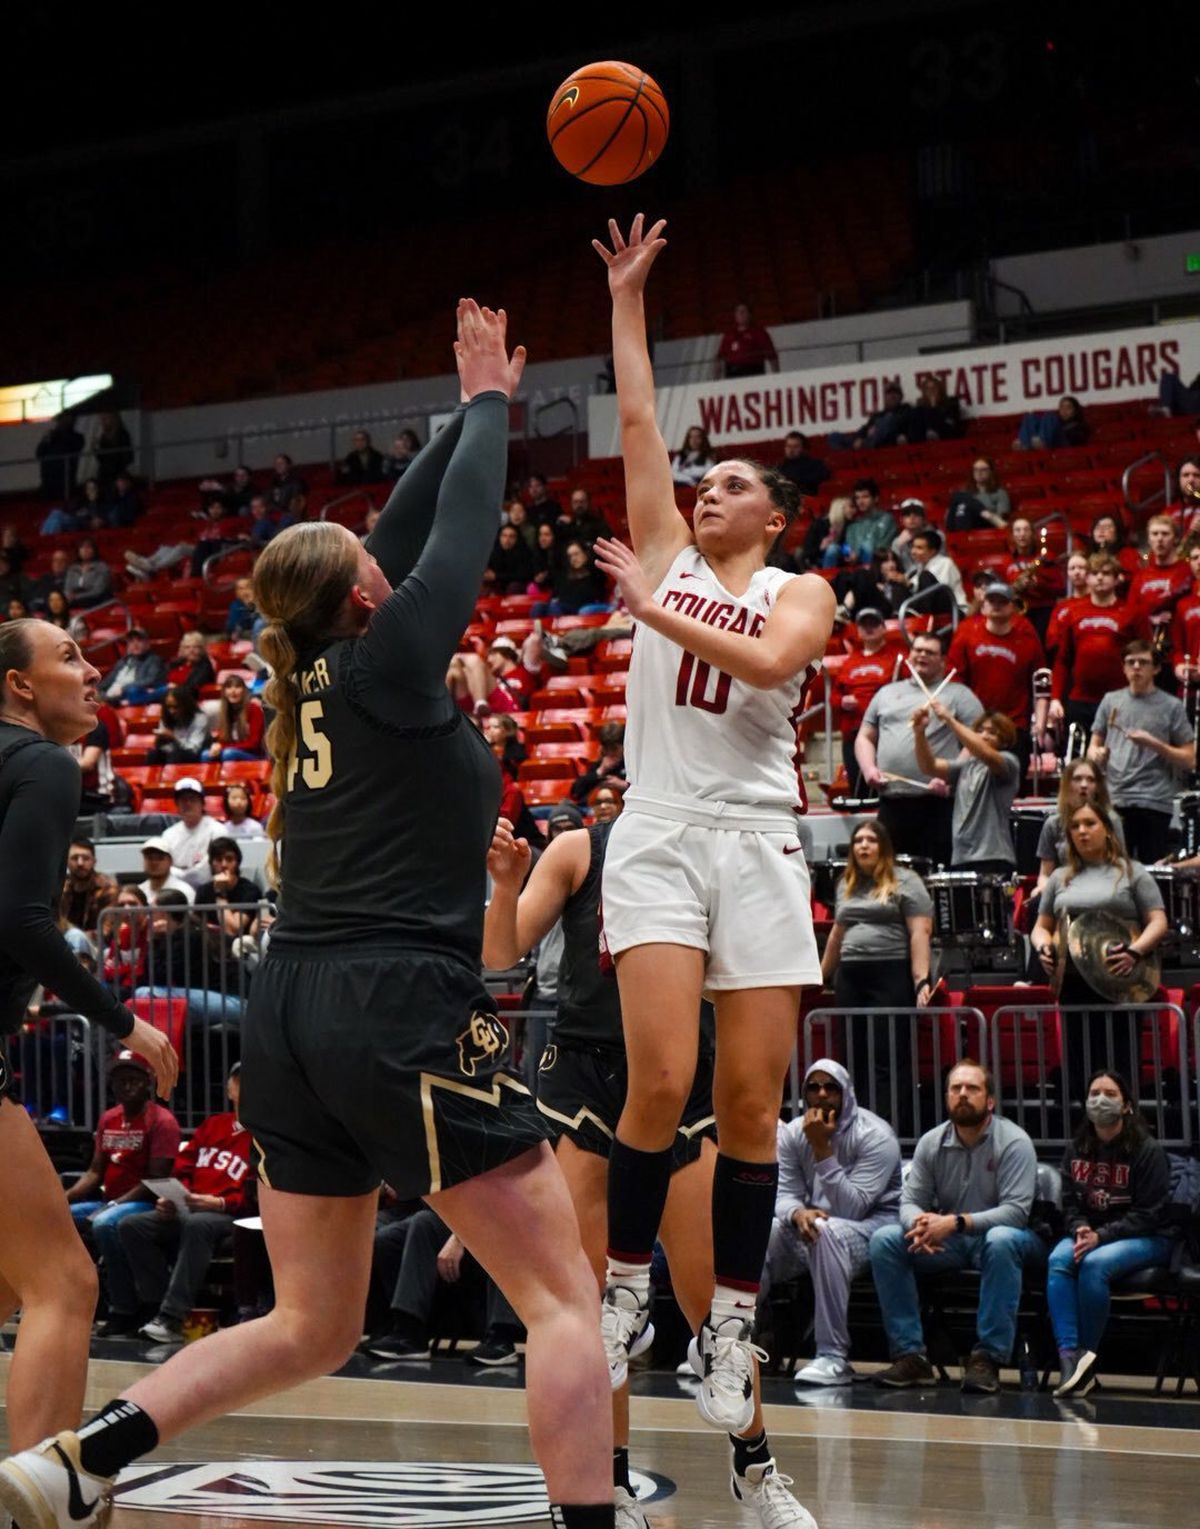 Washington State guard Eleonora Villa puts up a shot over Colorado defender Charlotte Whitaker during a Pac-12 Conference game in Pullman on Friday.  (Courtesy of WSU Athletics)